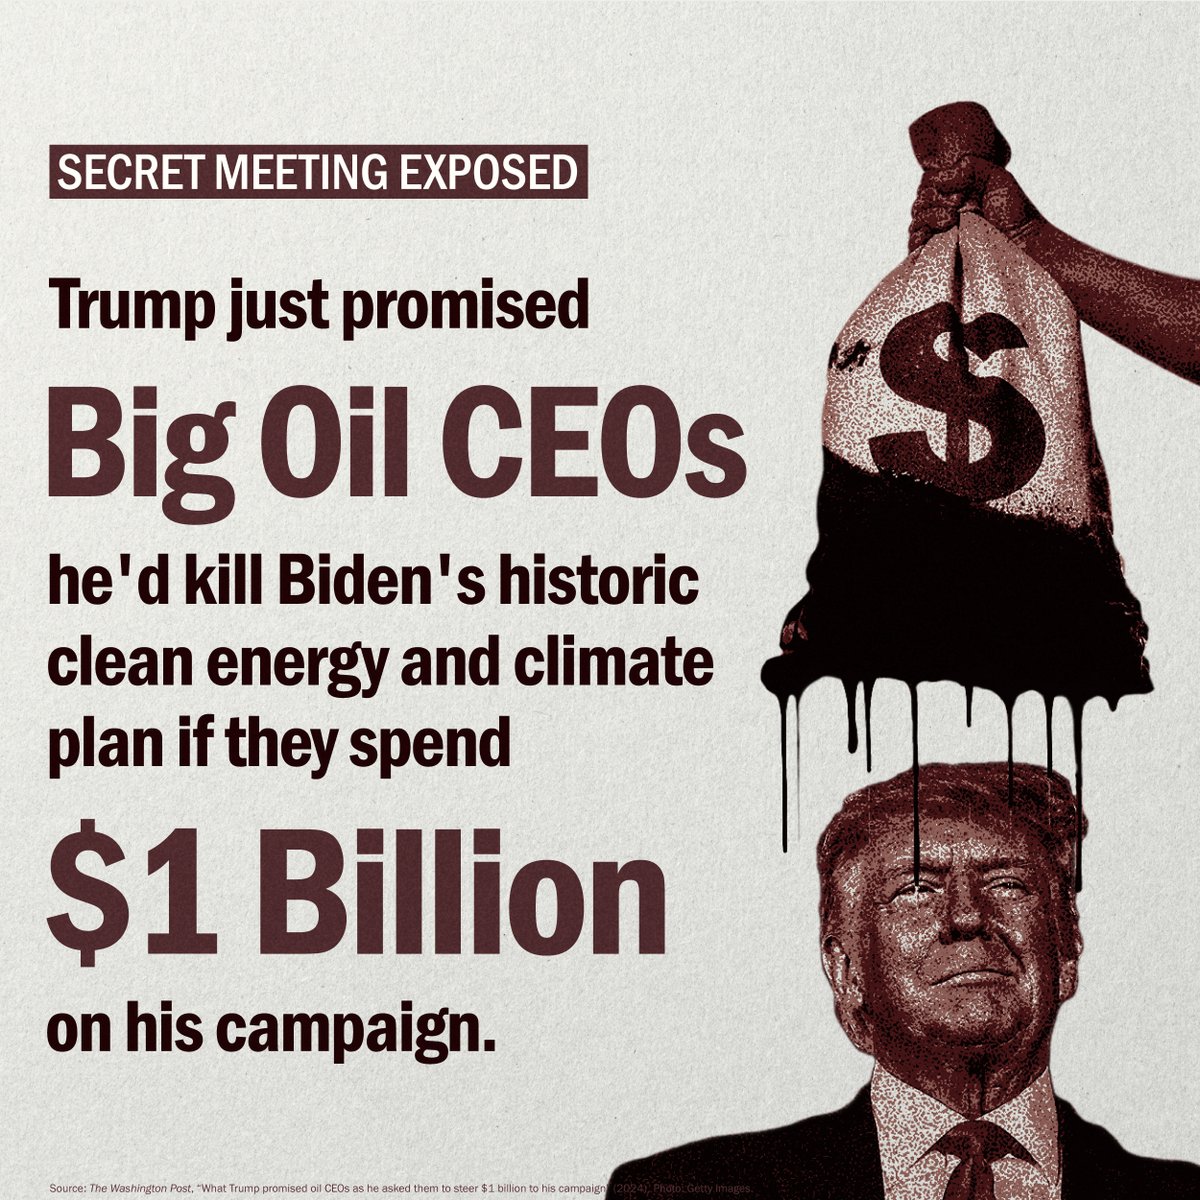 Trump is making promises to Big Oil that our planet can't afford.